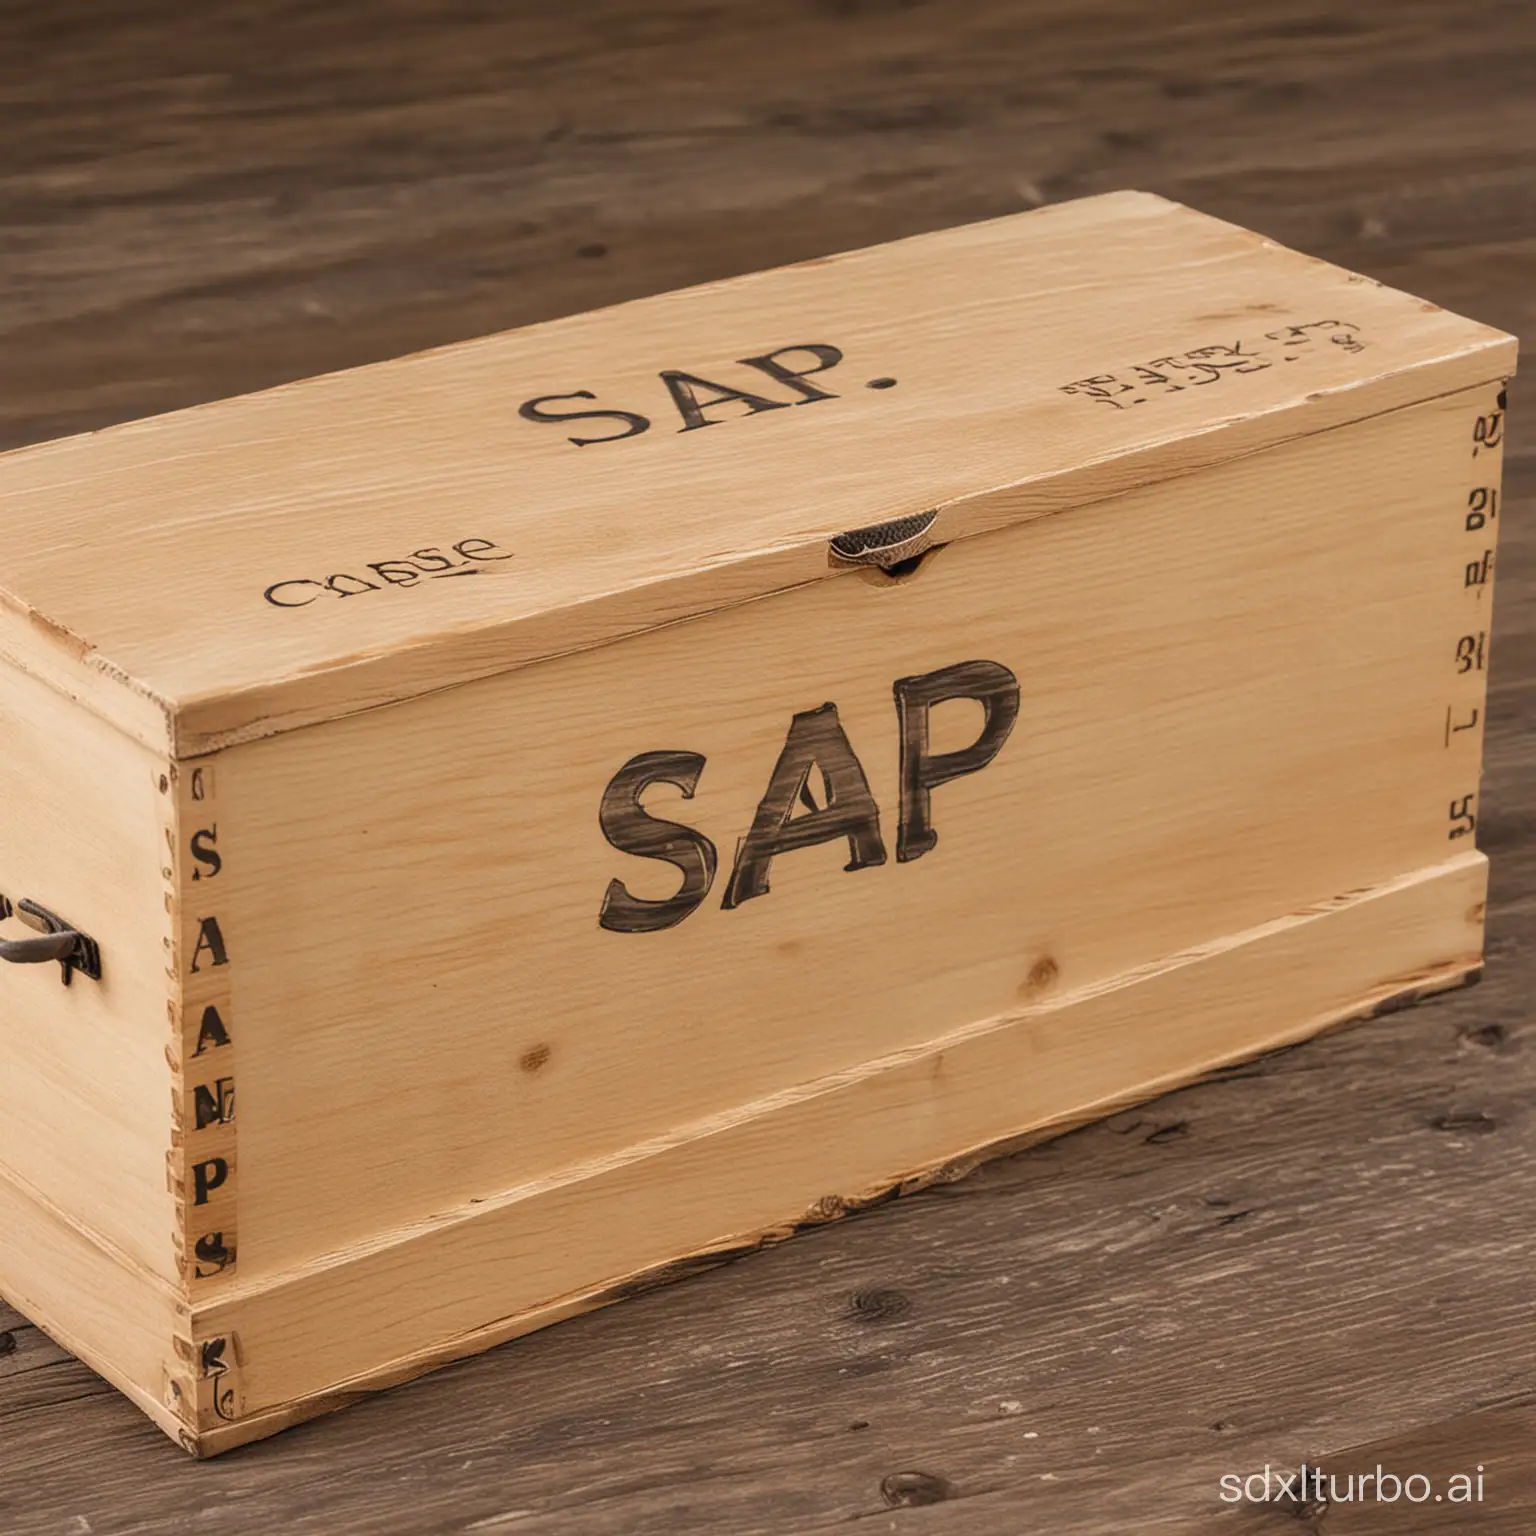 a big wooden box with a word "SAP" on the box